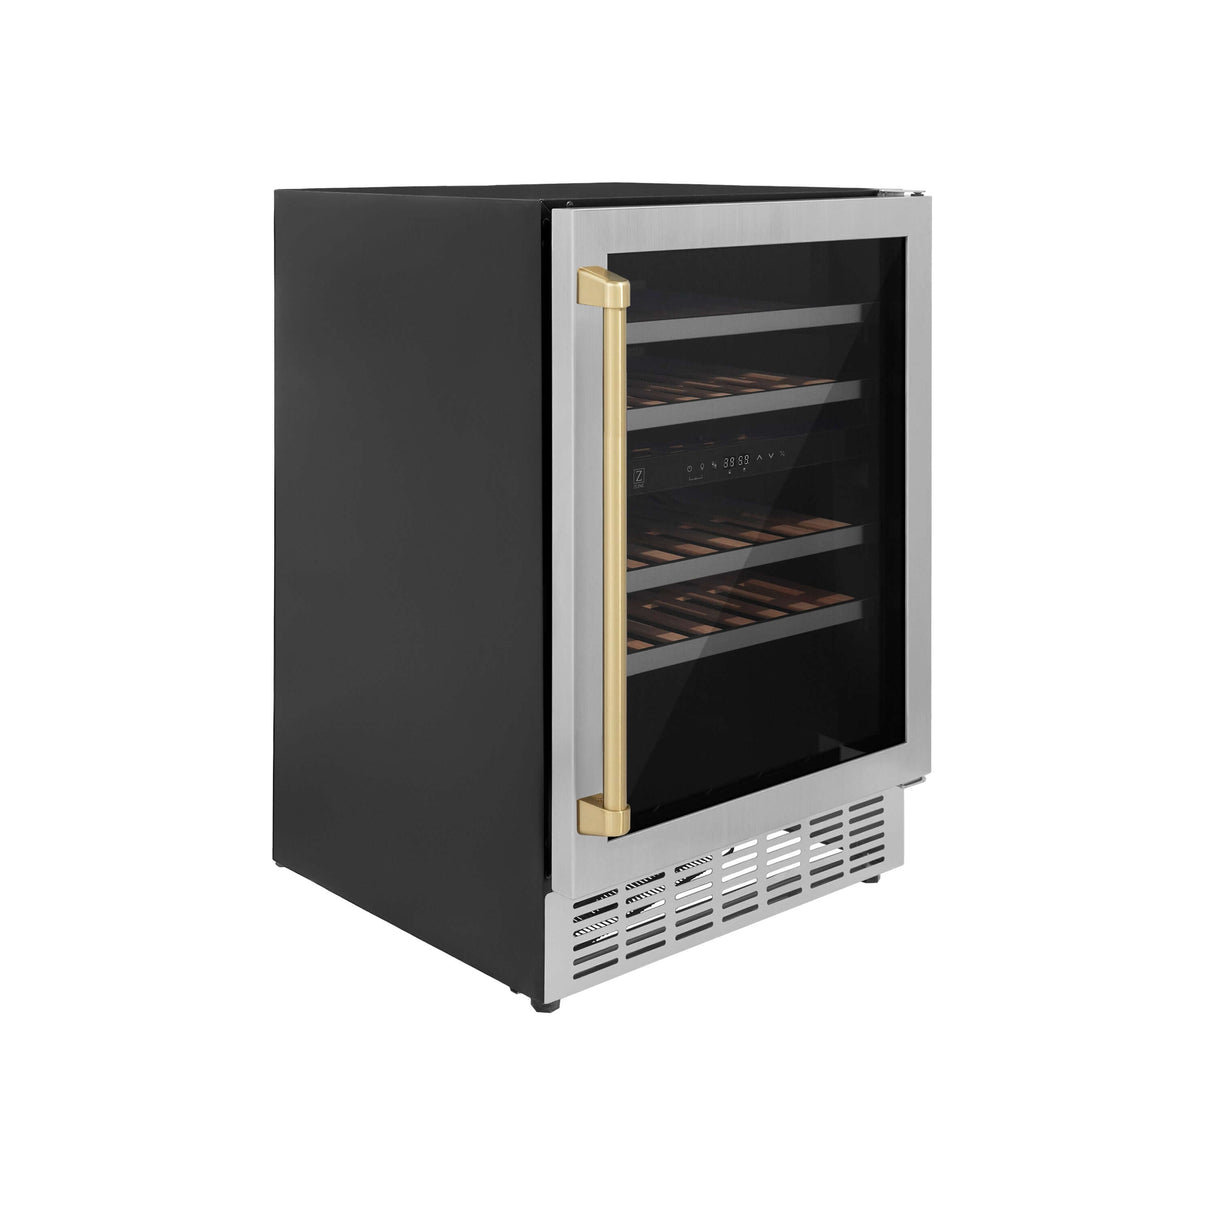 ZLINE Autograph Edition 24 in. Monument Dual Zone 44-Bottle Wine Cooler in Stainless Steel with Champagne Bronze Accents (RWVZ-UD-24-CB)